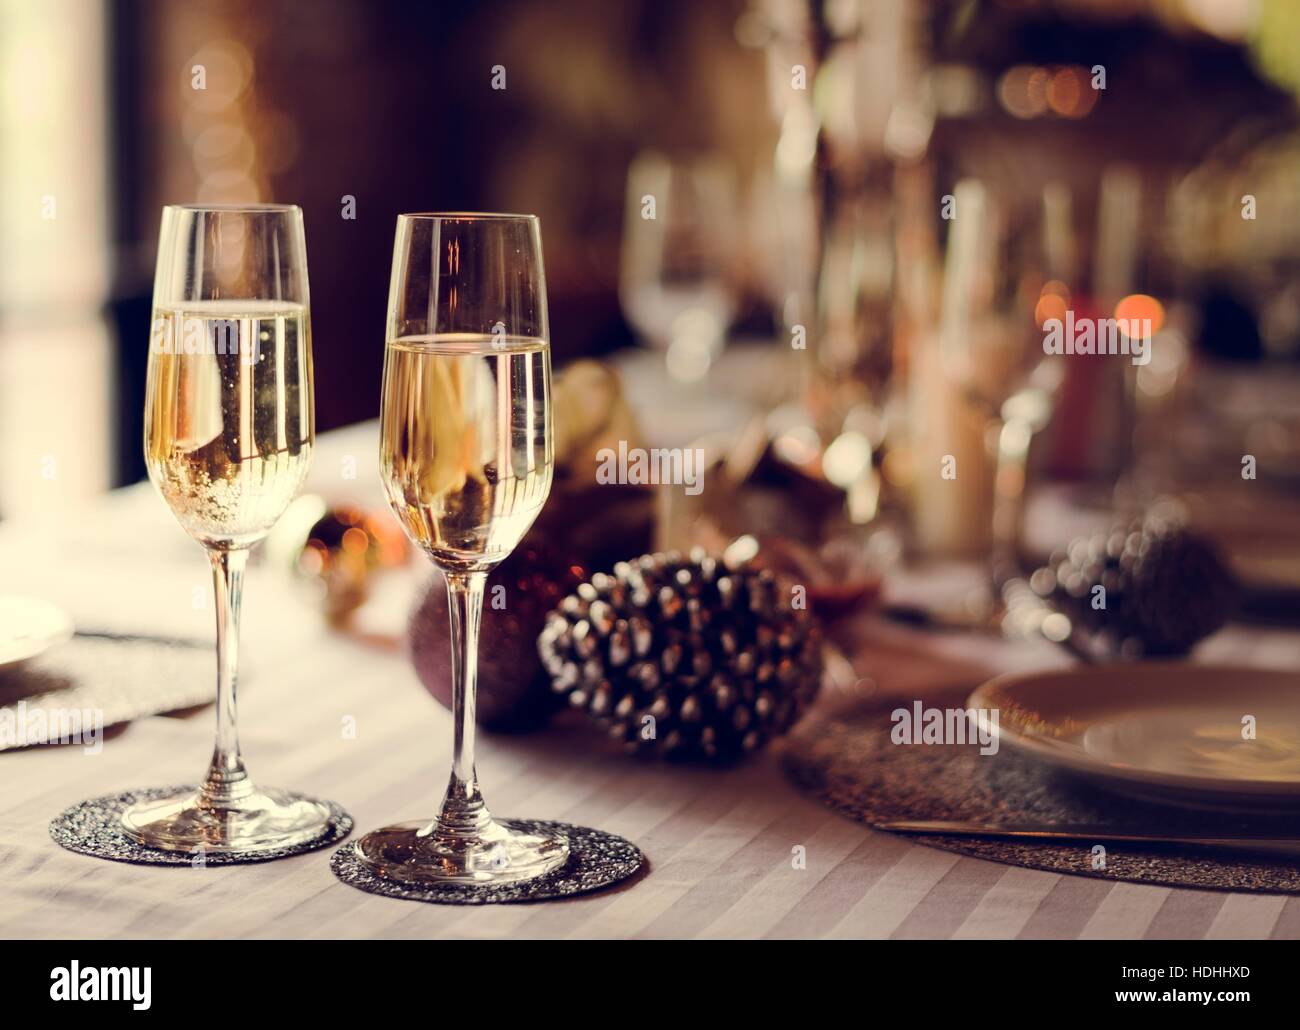 Restaurant Chilling Out Classy Lifestyle Reserved Concept Stock Photo ...